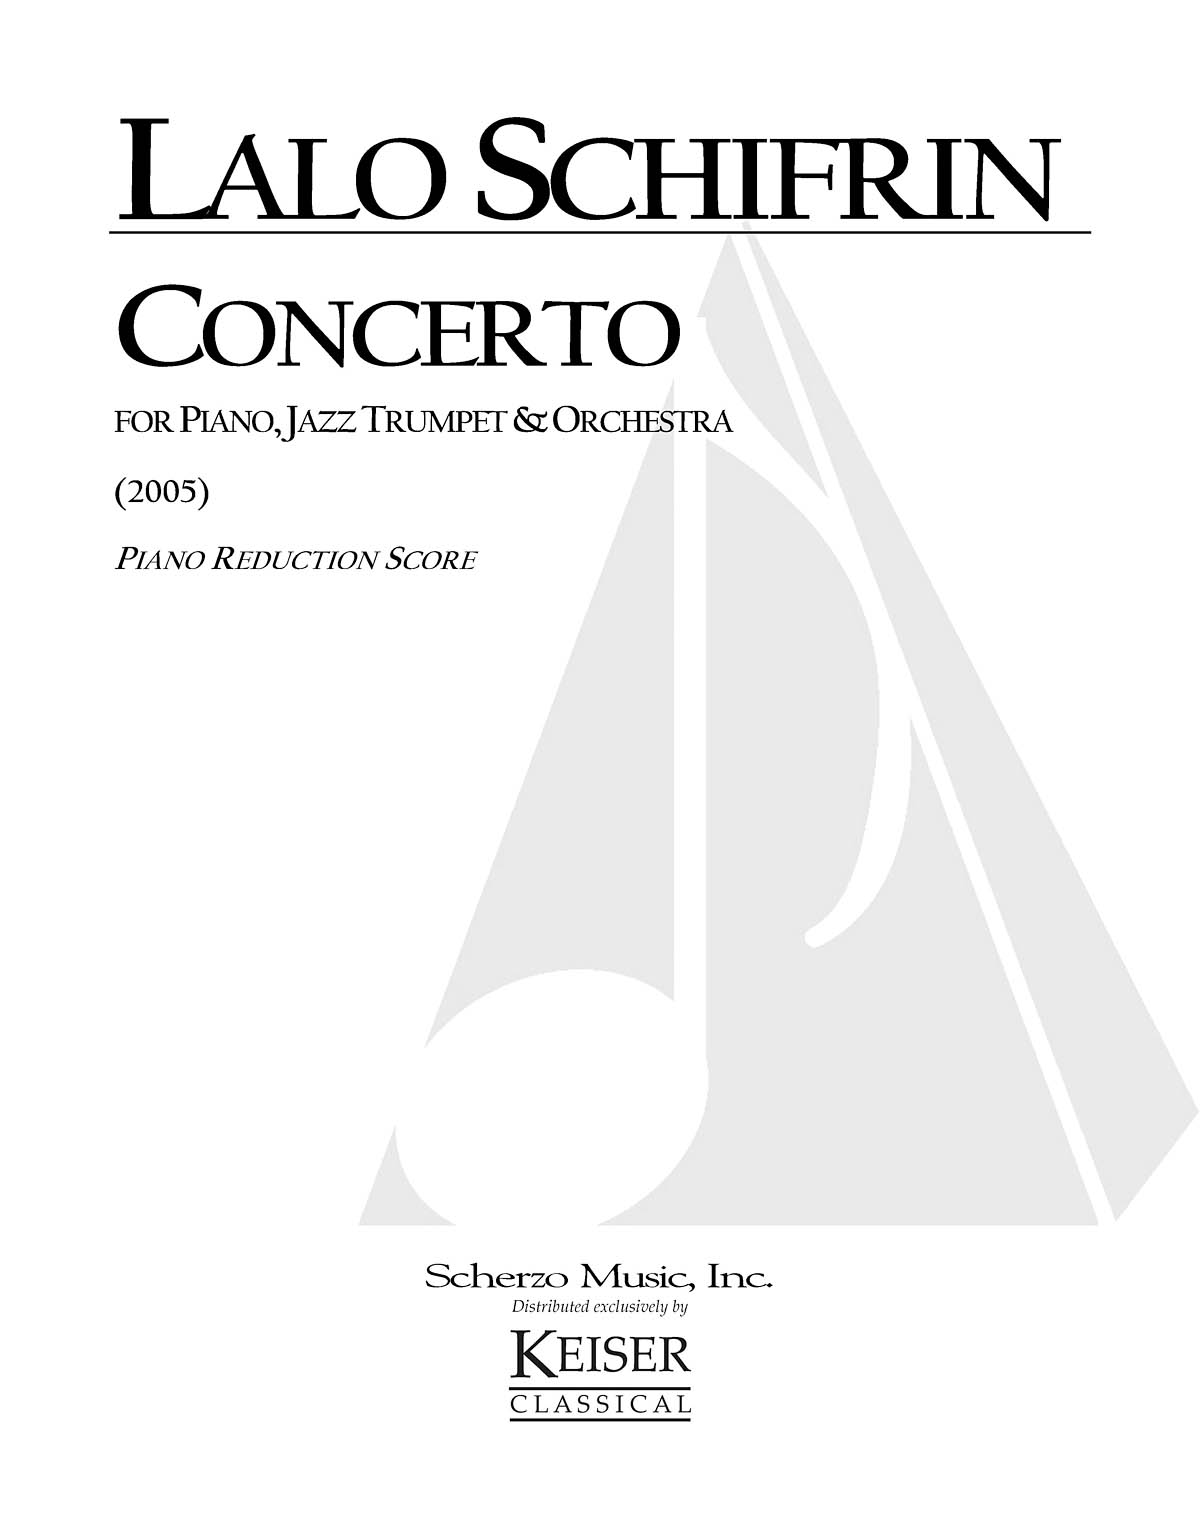 Lalo Schifrin: Concerto for Piano  Jazz Trumpet and Orchestra: Trumpet and